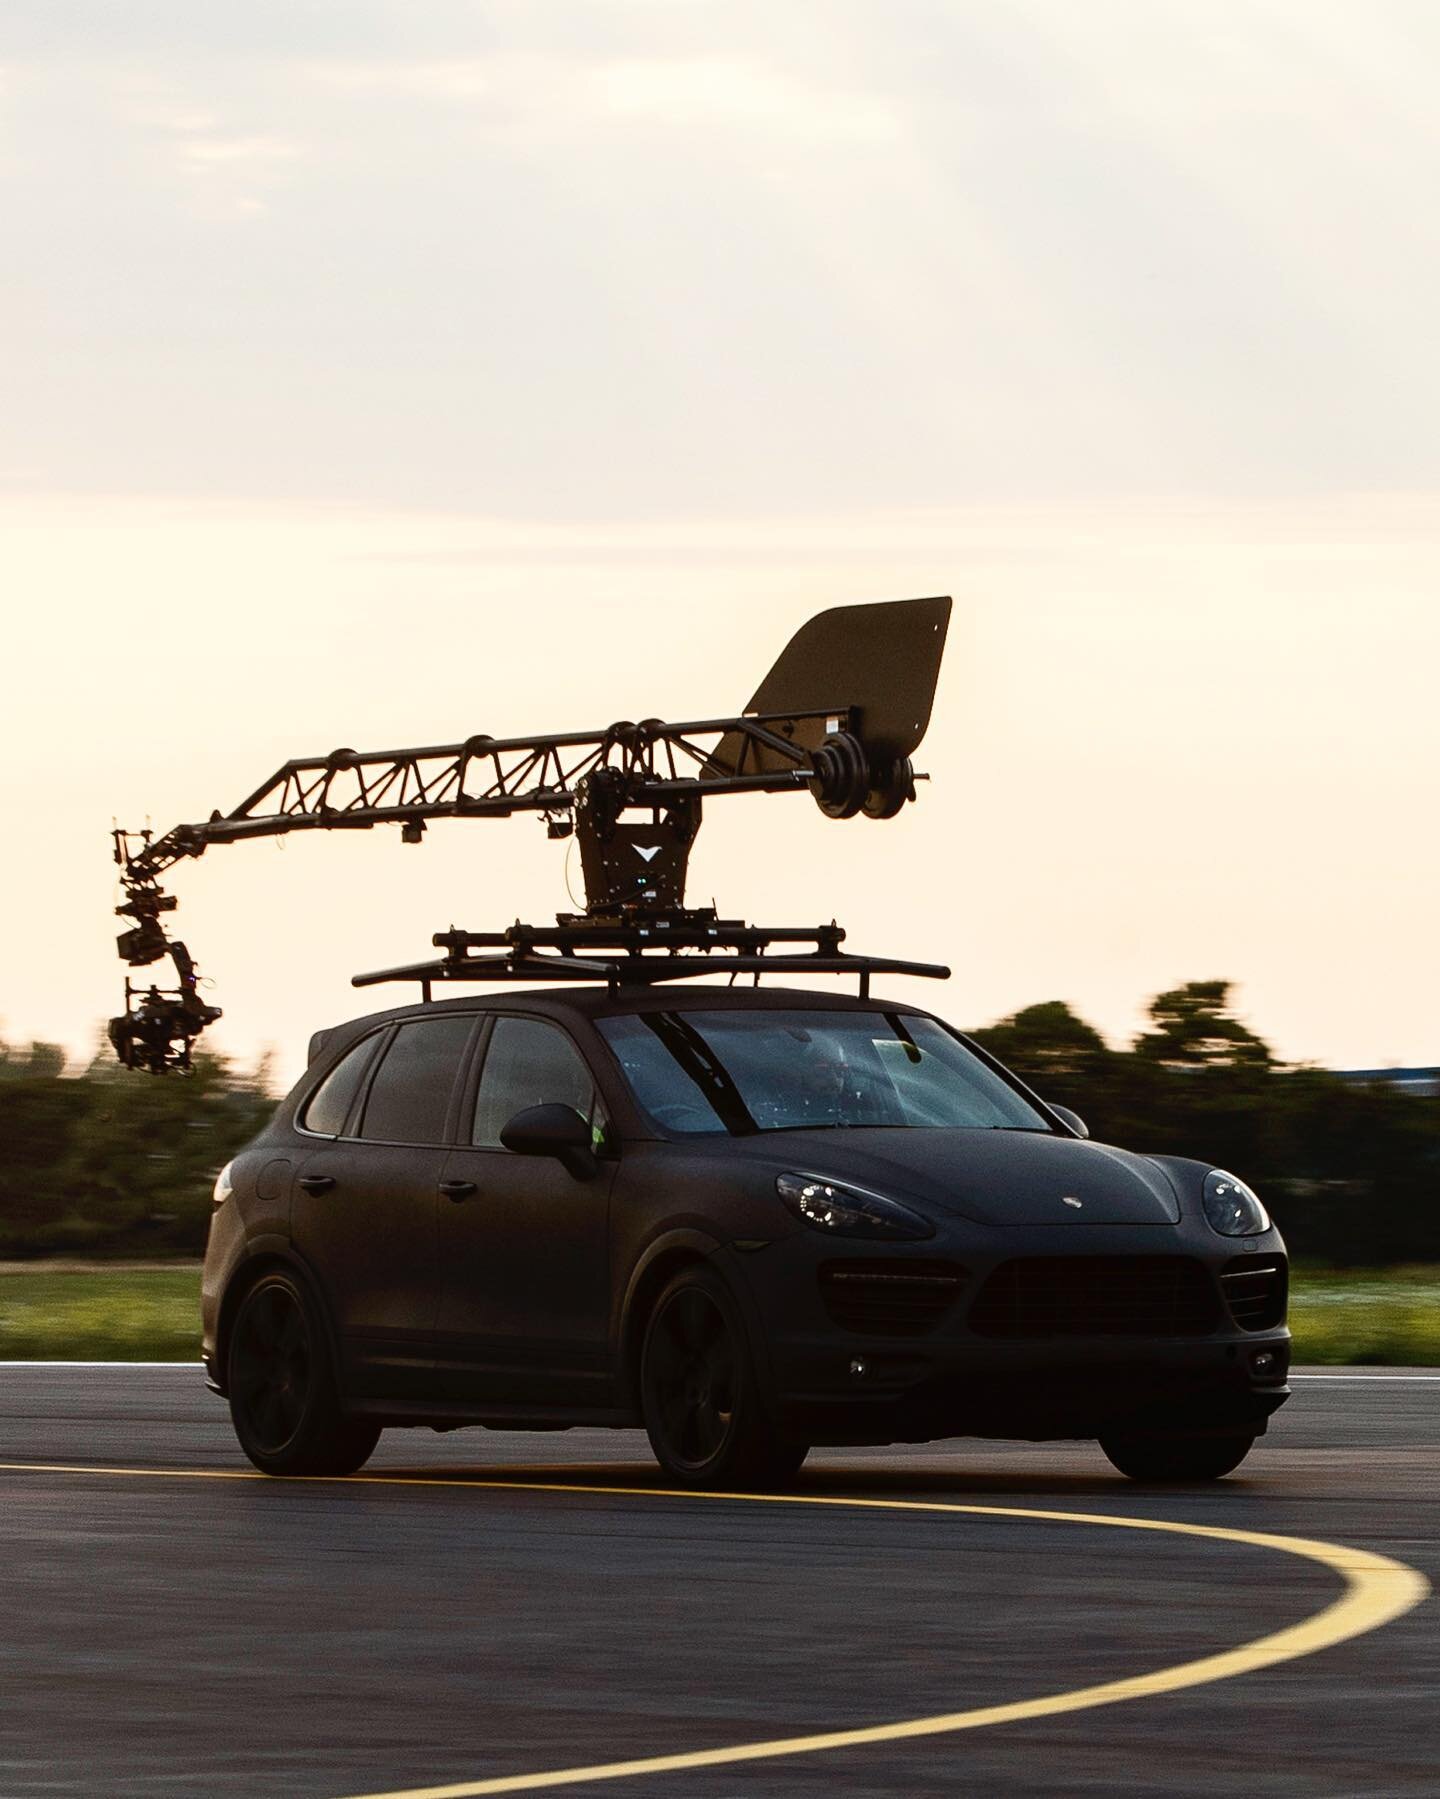 Our Motocrane Ultra in action! We&rsquo;re excited to share everything we&rsquo;ve been shooting recently&hellip; 🖤🎥🎬🕹🏎